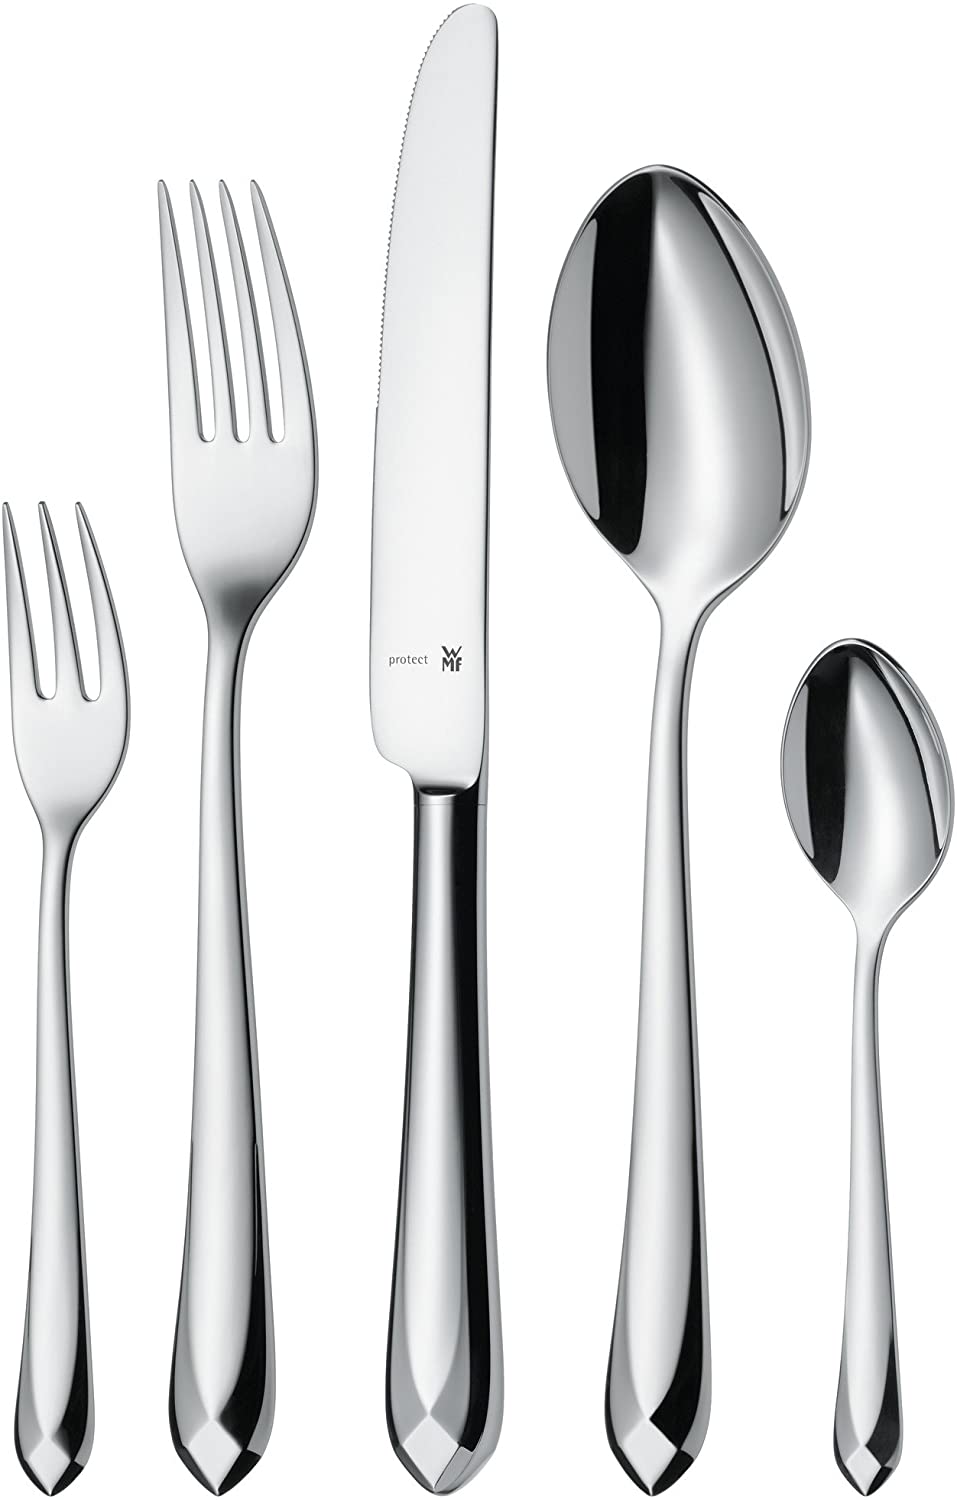 WMF Jette cutlery set, 66 pcs, 12 persons, Cromargan protect